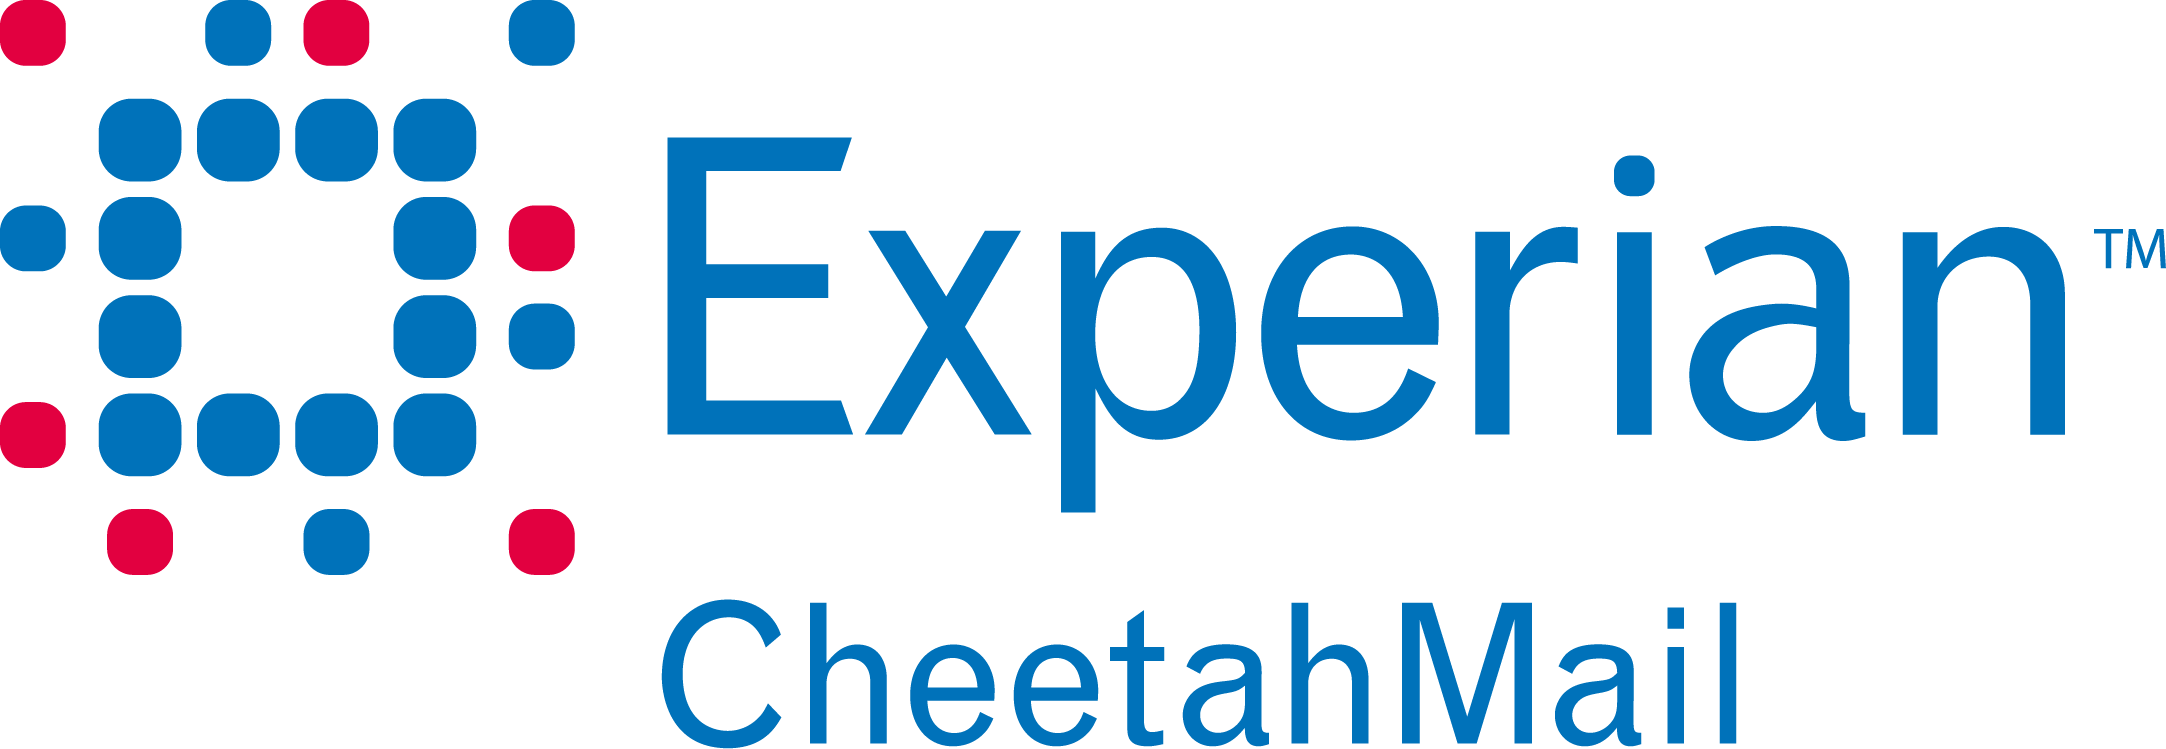 CheetahMail Logo - Index of /pub/wikimedia/images/wikipedia/fr/archive/9/98/